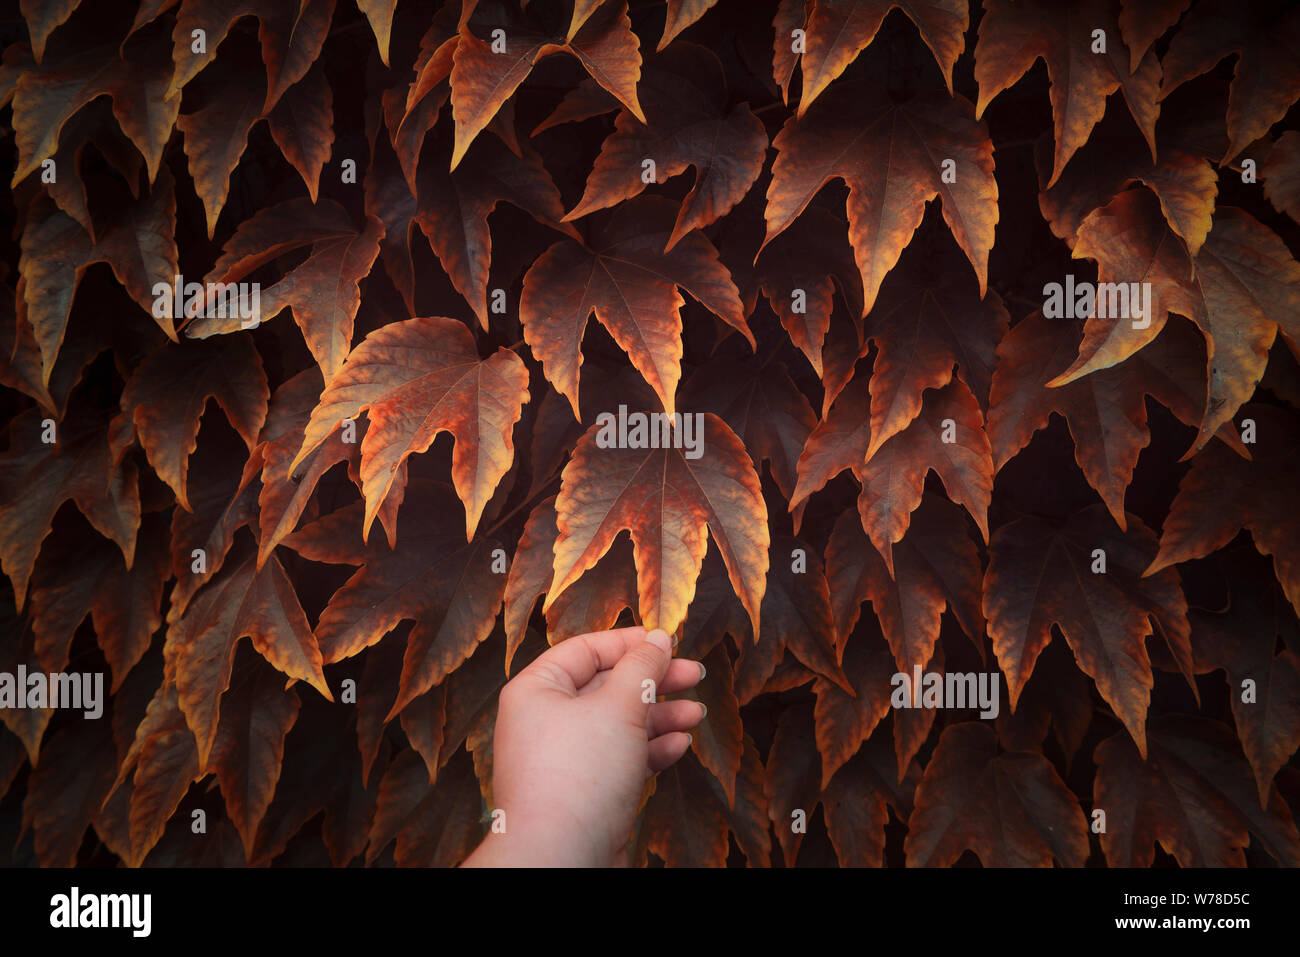 Colorful fall frame. Golden and red autumn leaves on a wall and a hand touching one leaf. Autumn colored ivy leaves background. Picking autumn leaf. Stock Photo